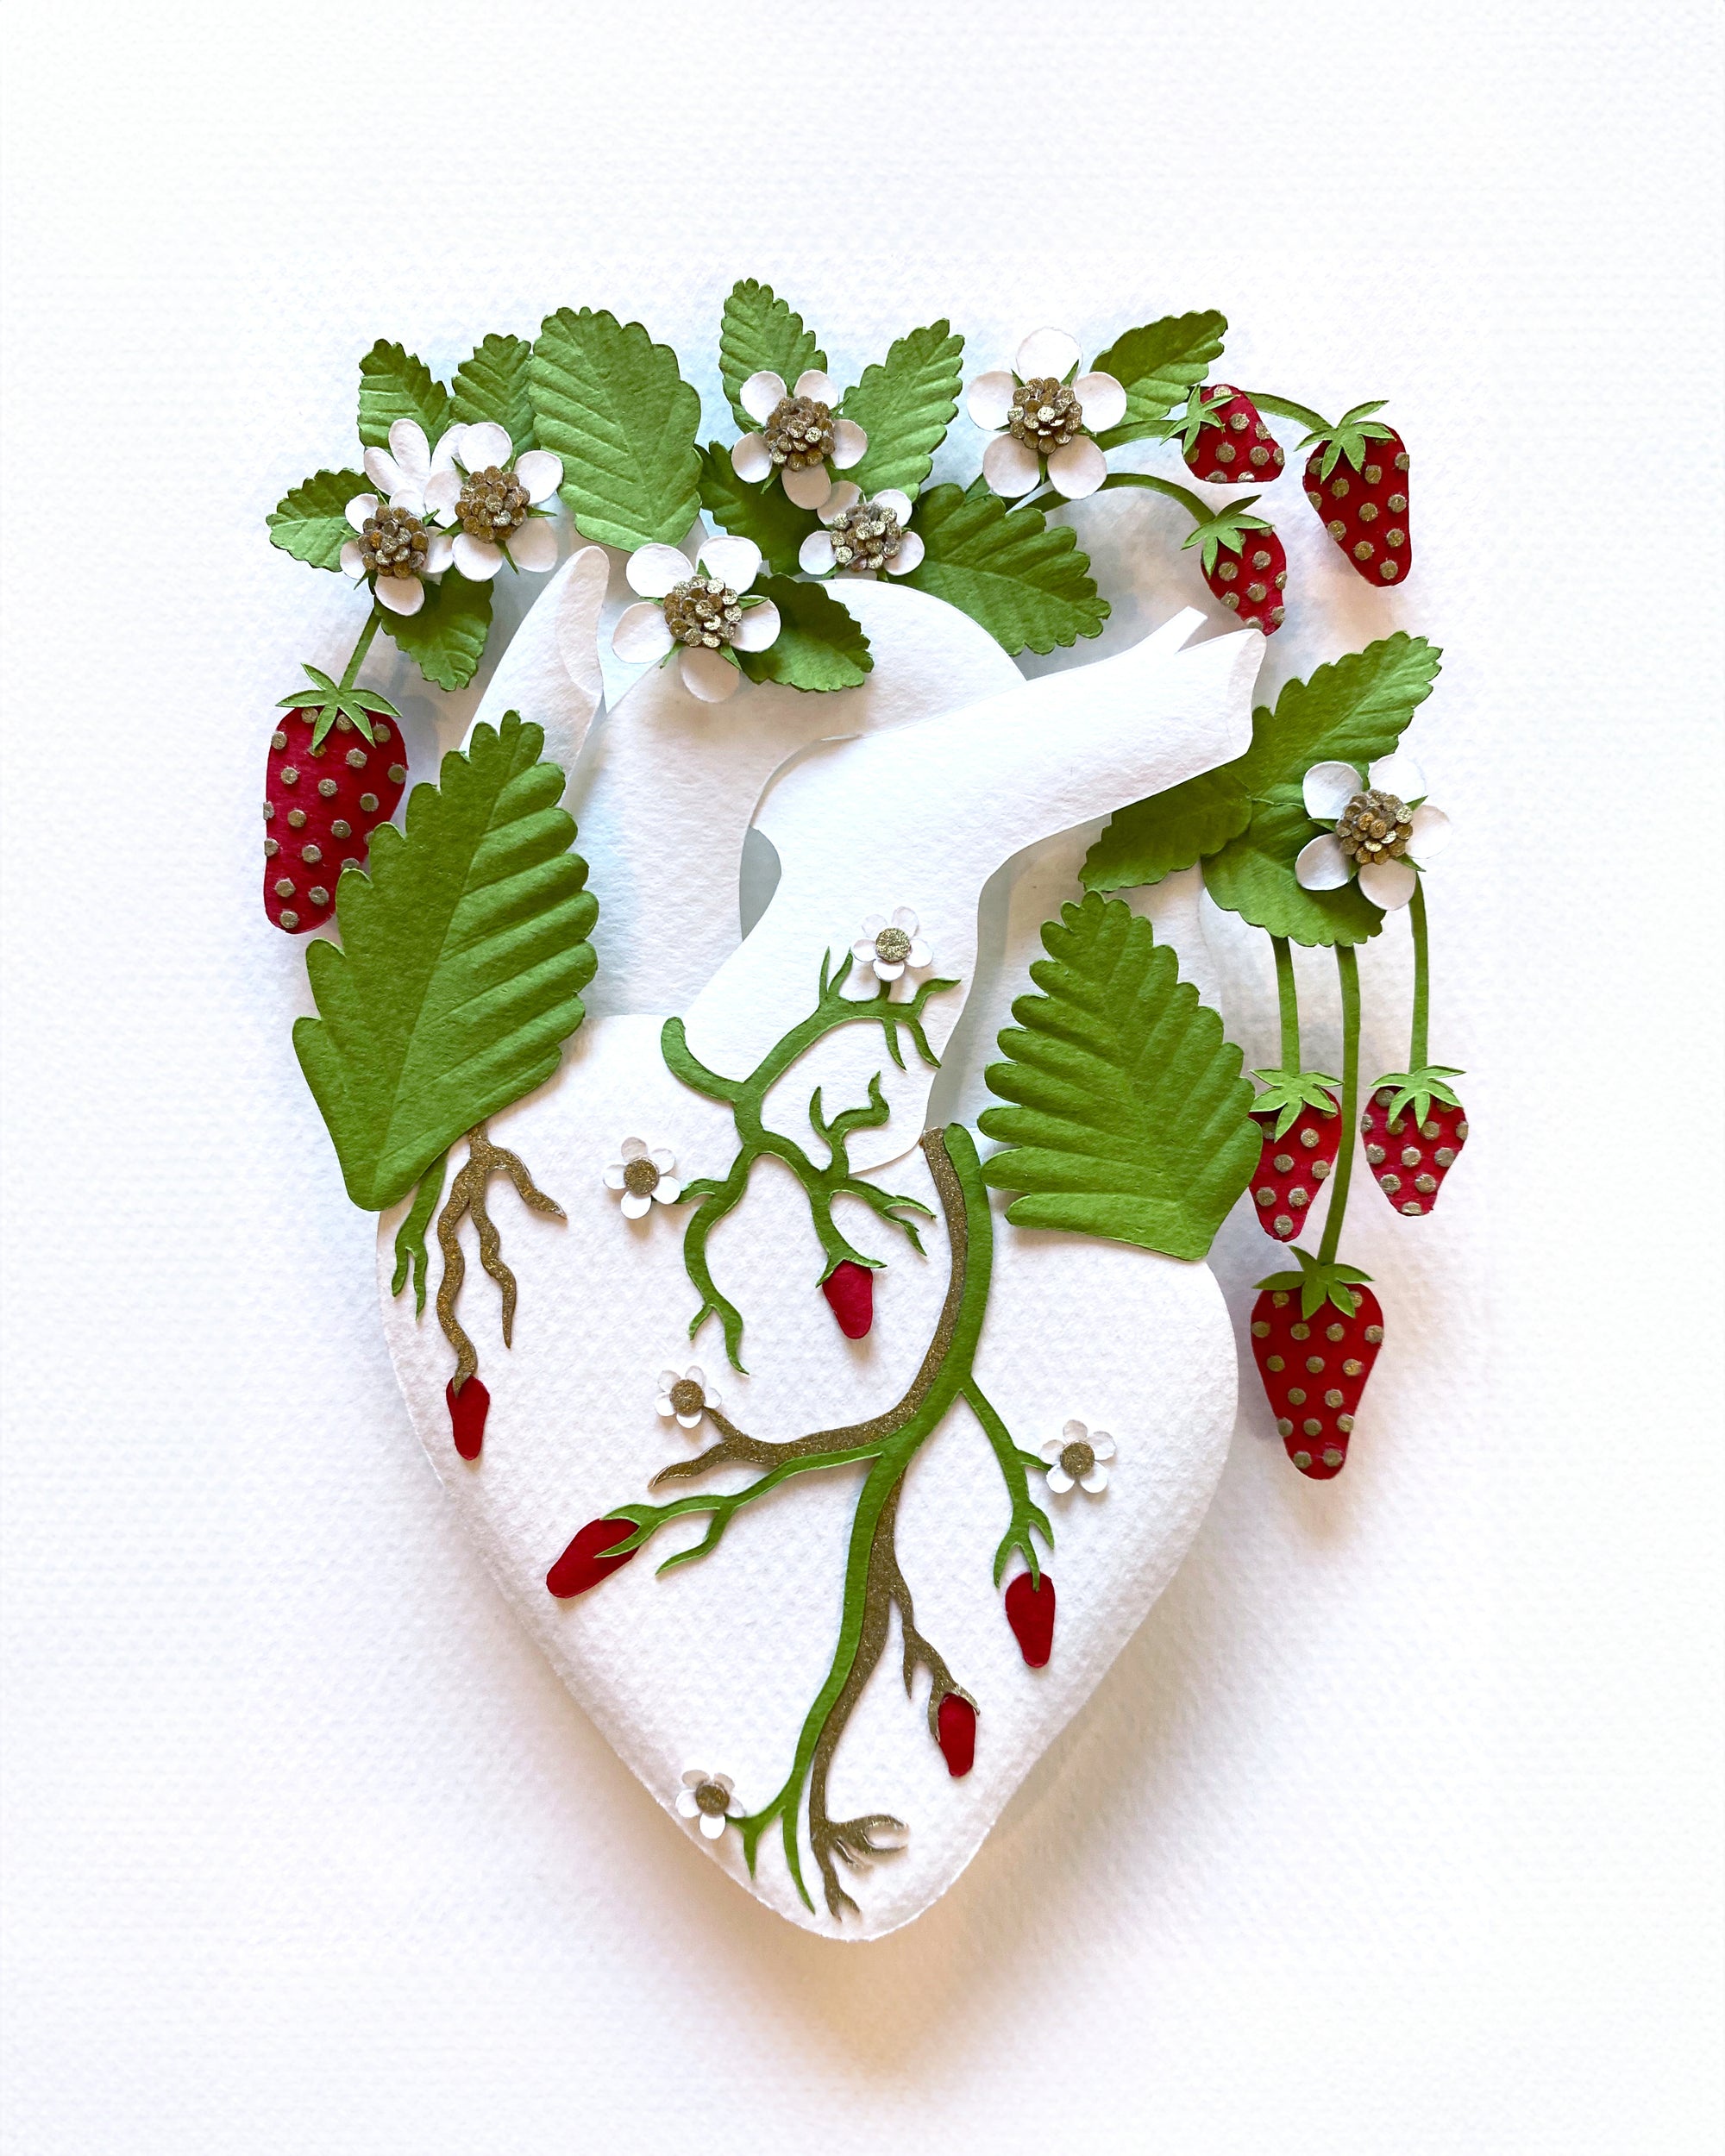 Anatomical heart with strawberries made of cut paper